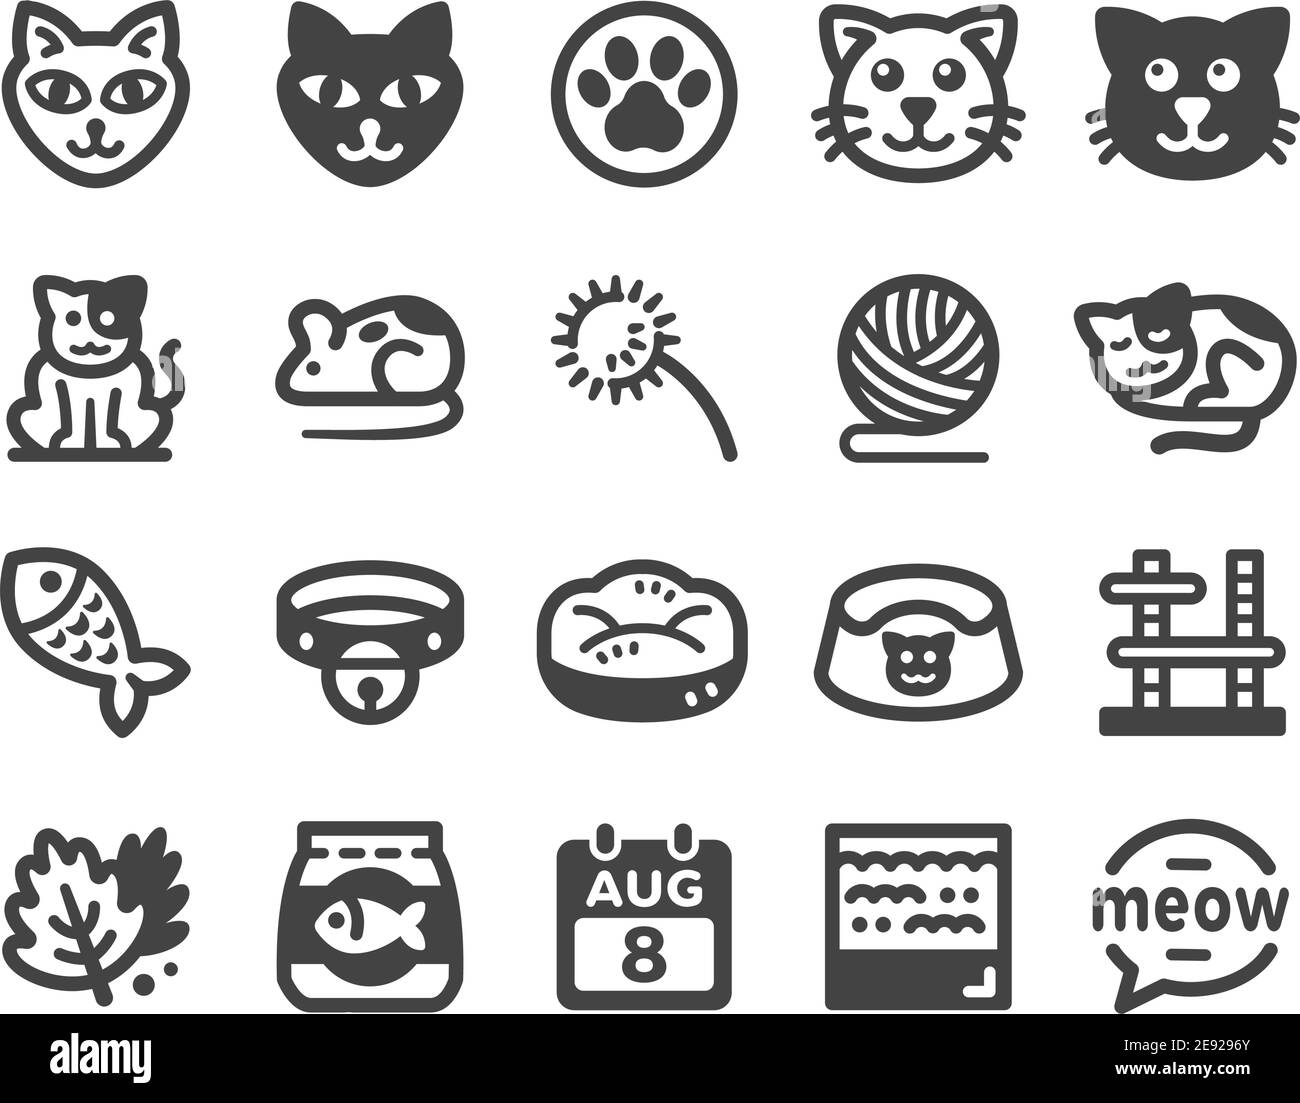 icons, cat and icon - image #7617711 on